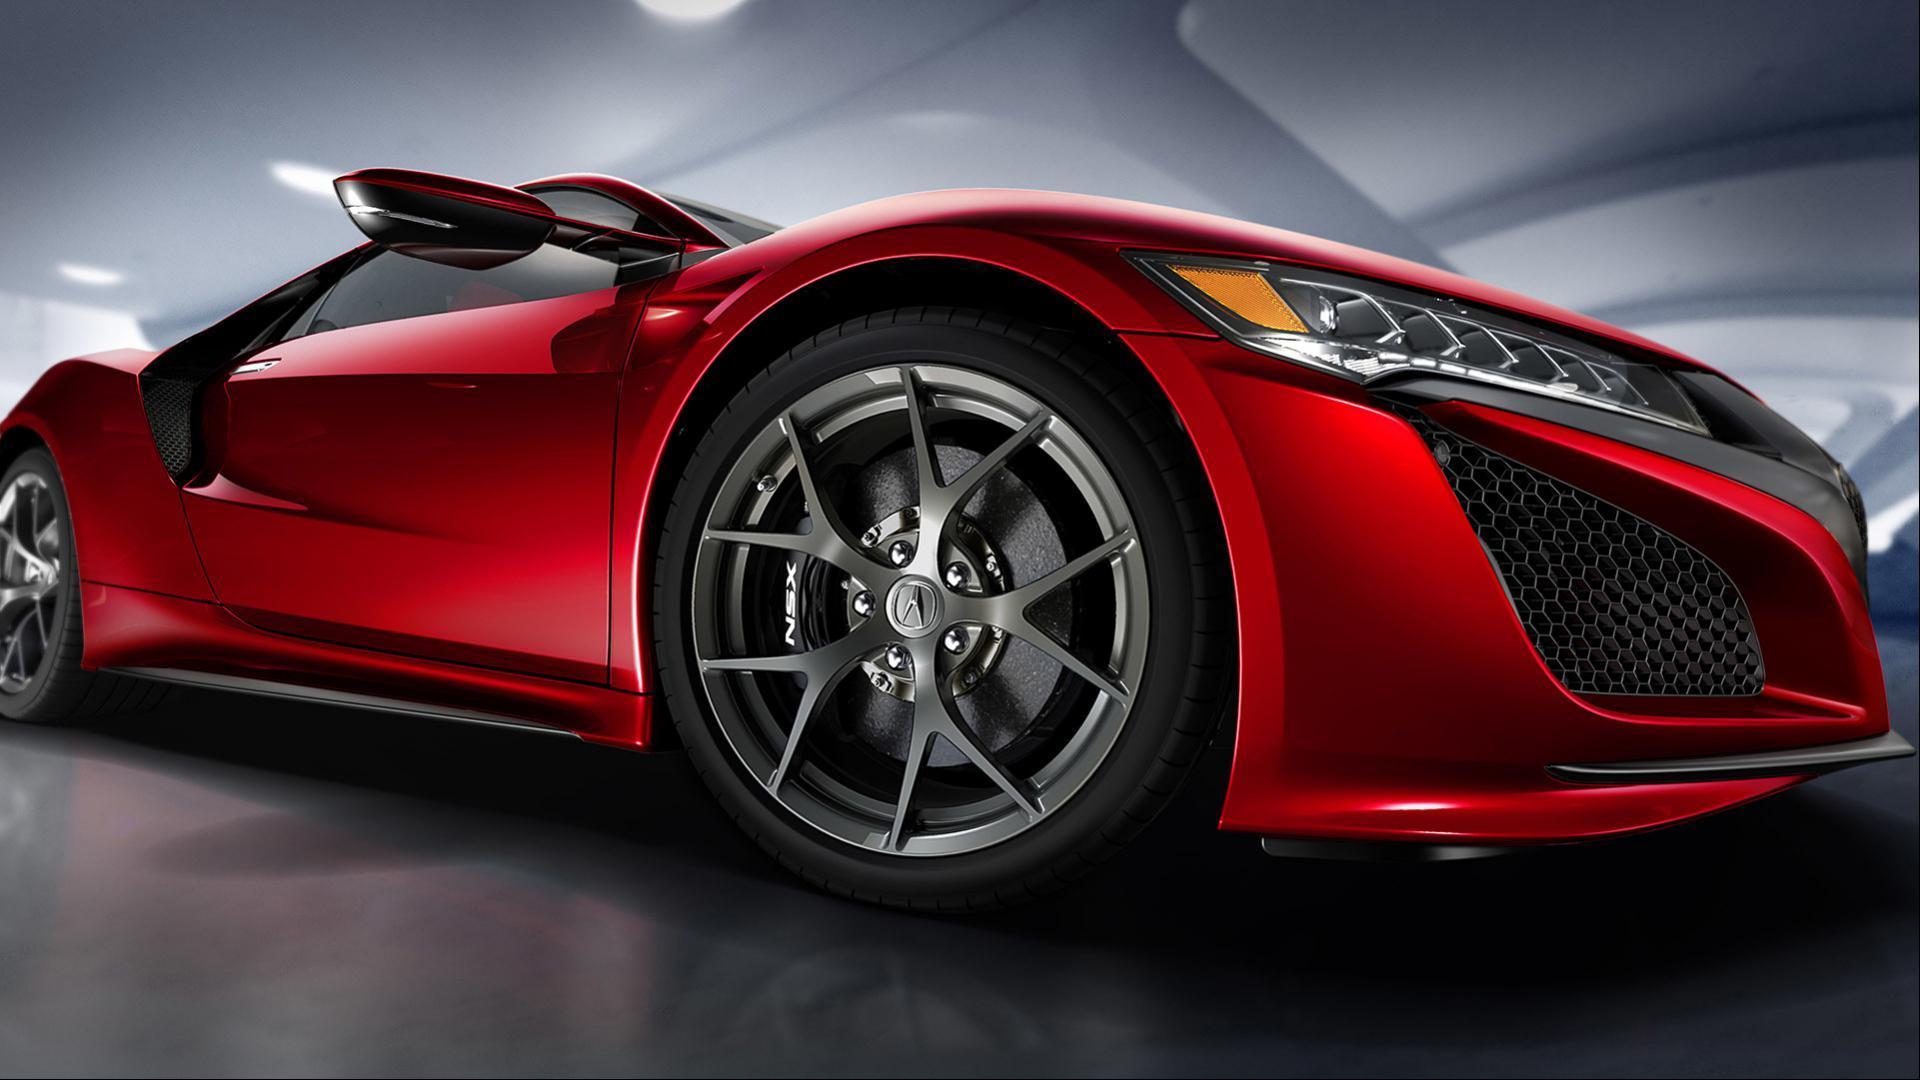 Acura NSX For Cool Wallpaper Of 2016 Car Models. New Car